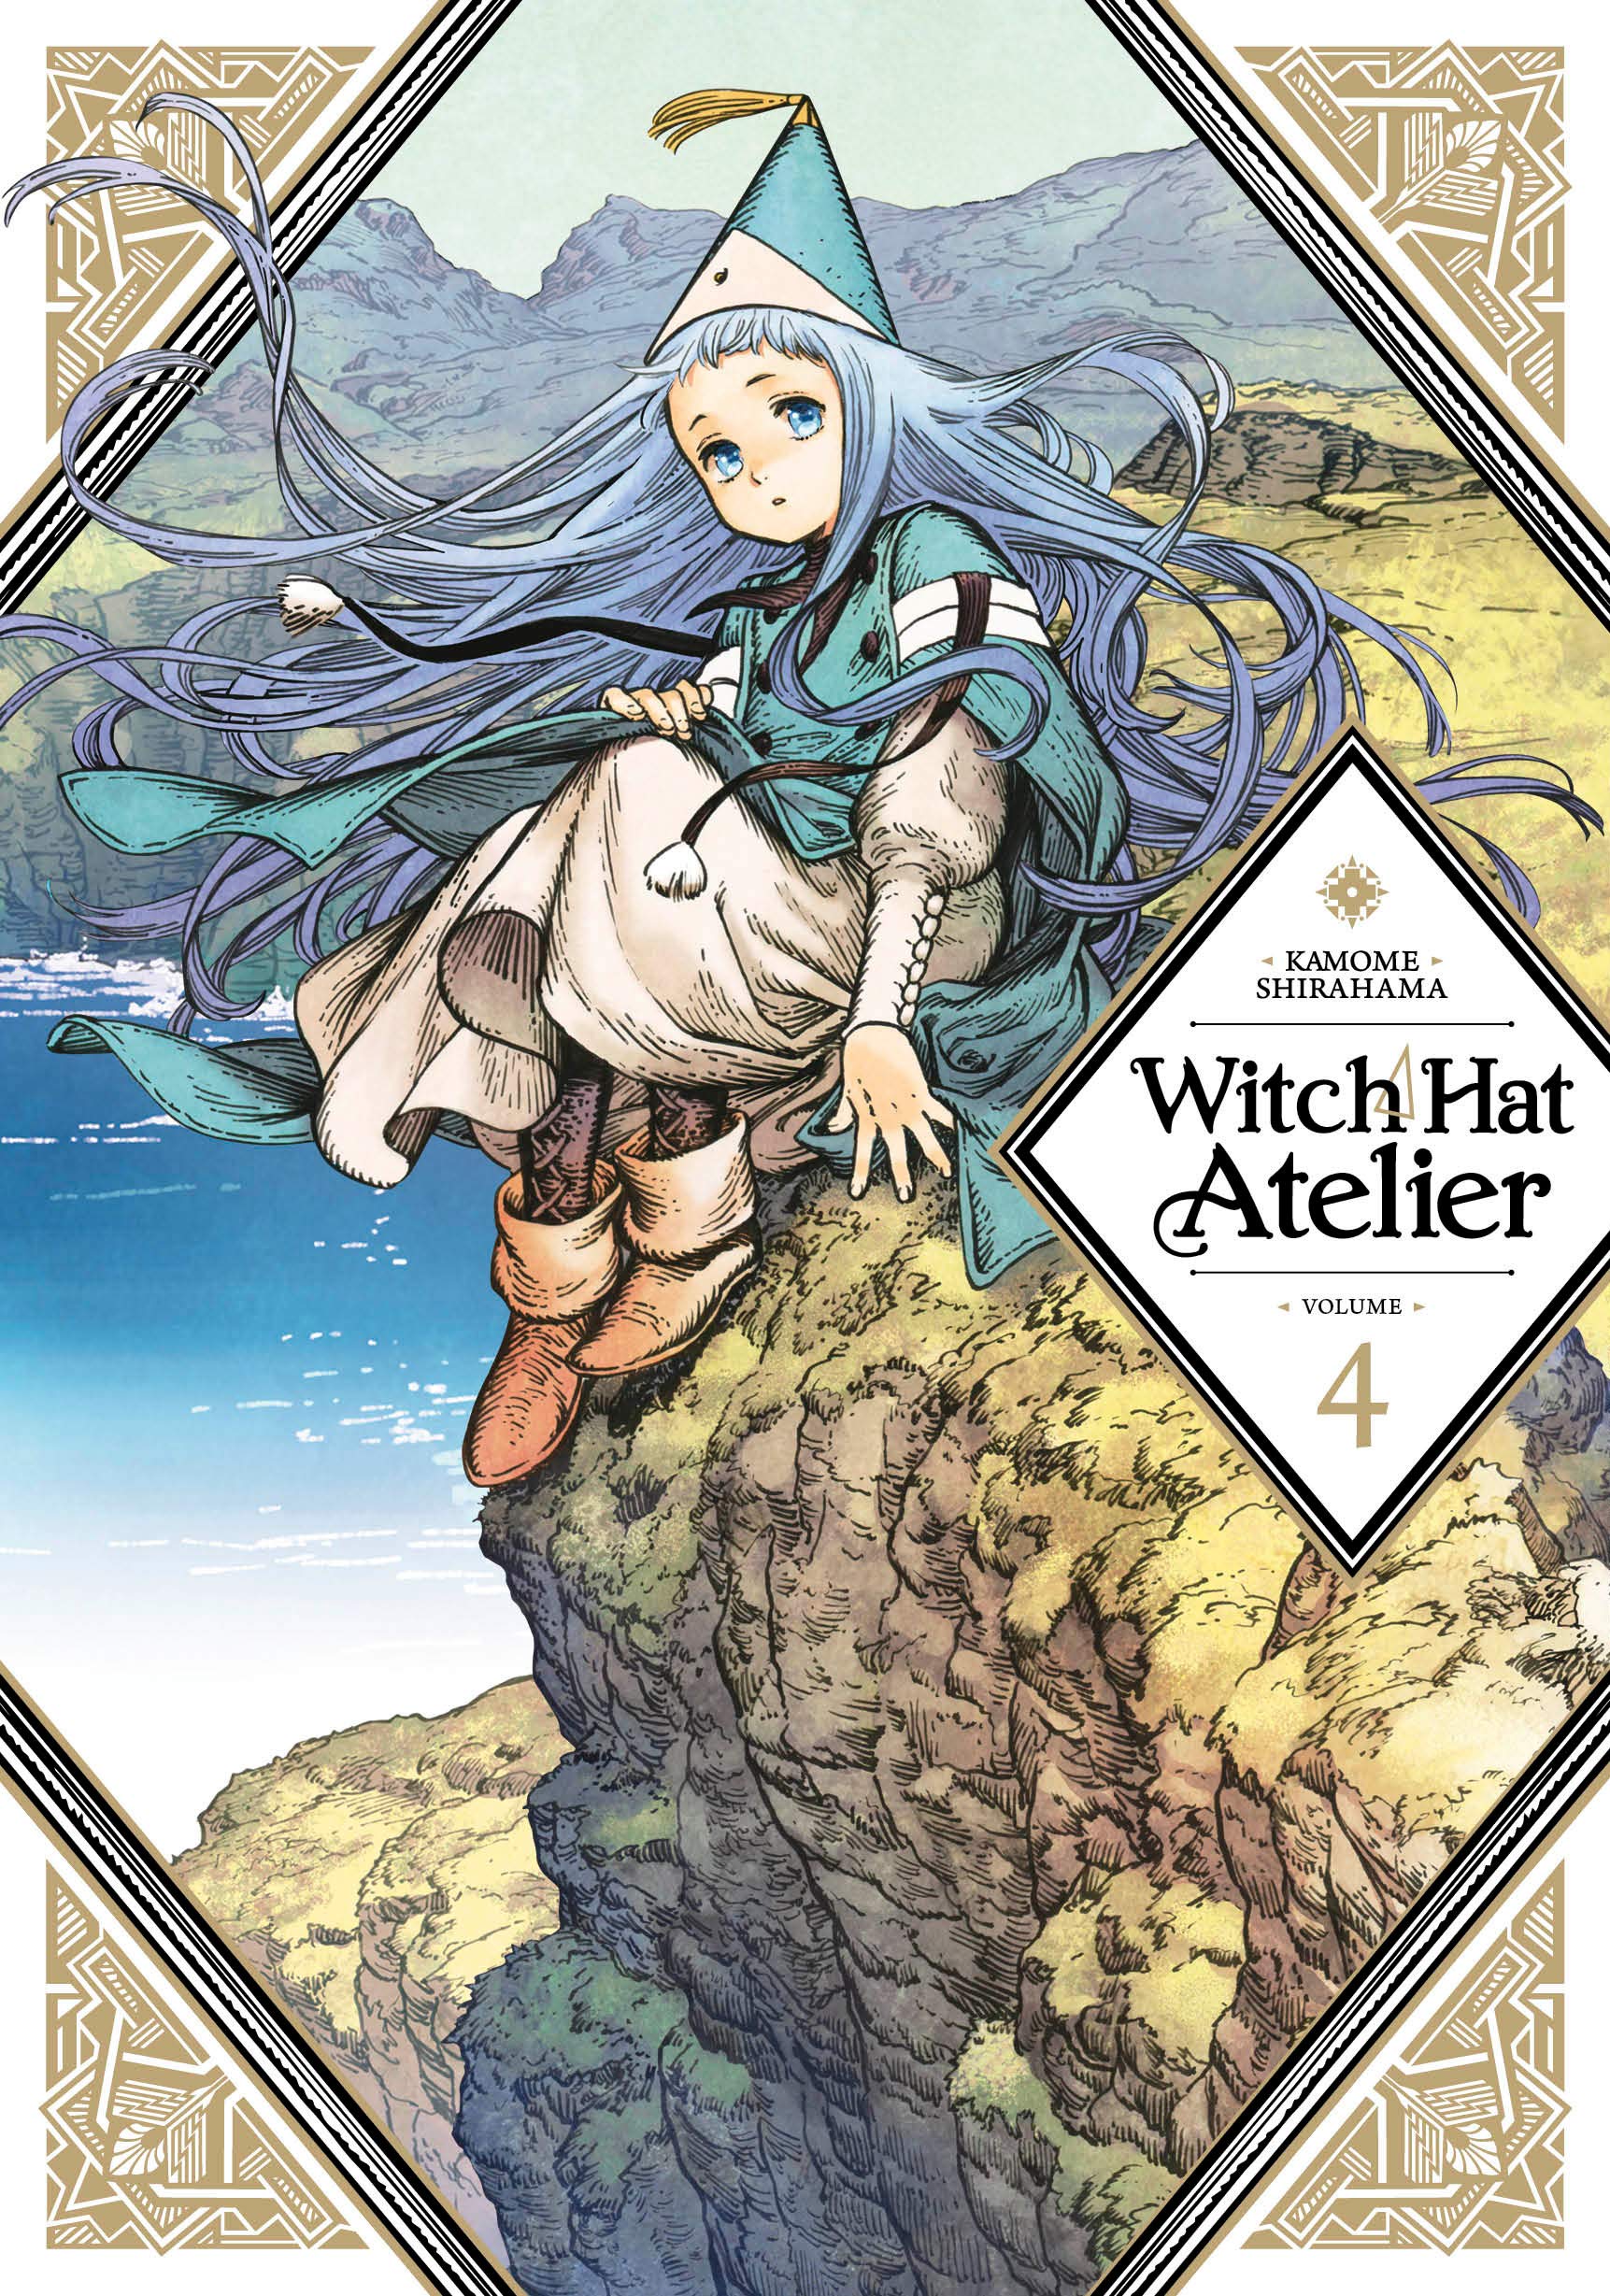 Witch Hat Atelier Volume 4 Review • Anime UK News